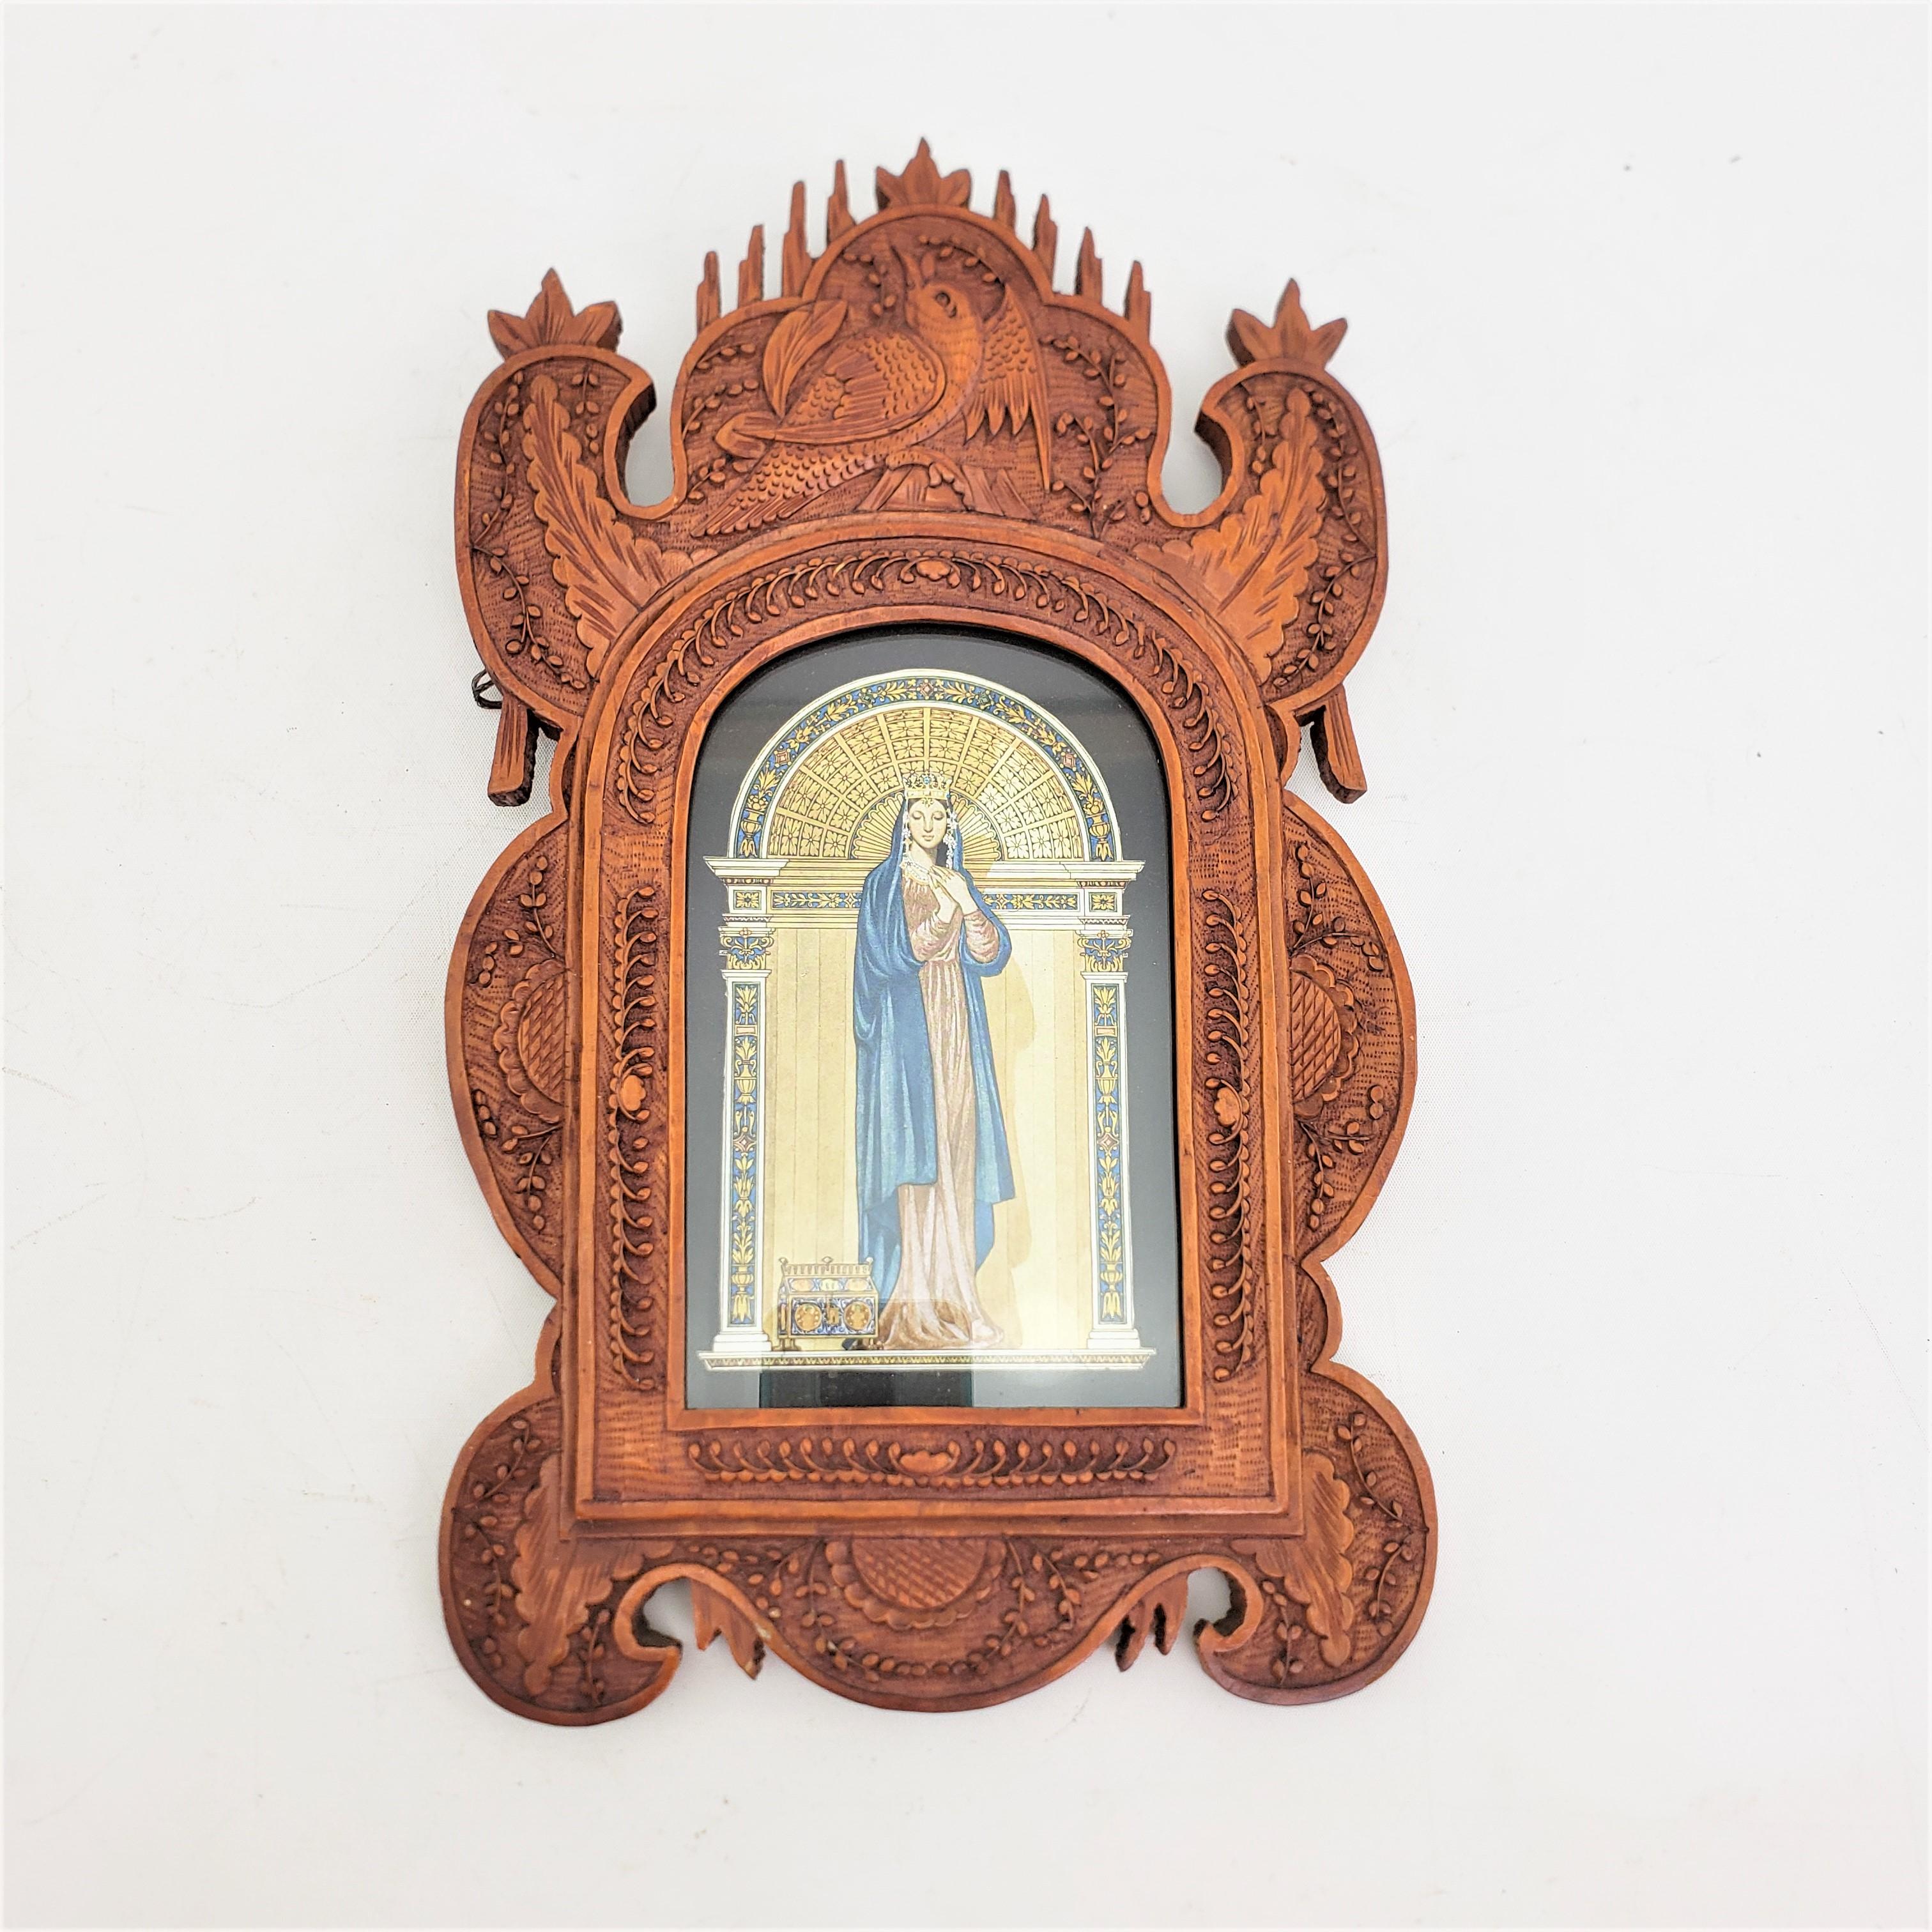 Softwood Antique Folk Art Ornately Carved Wooden Picture Frame with Birds & Flowers For Sale